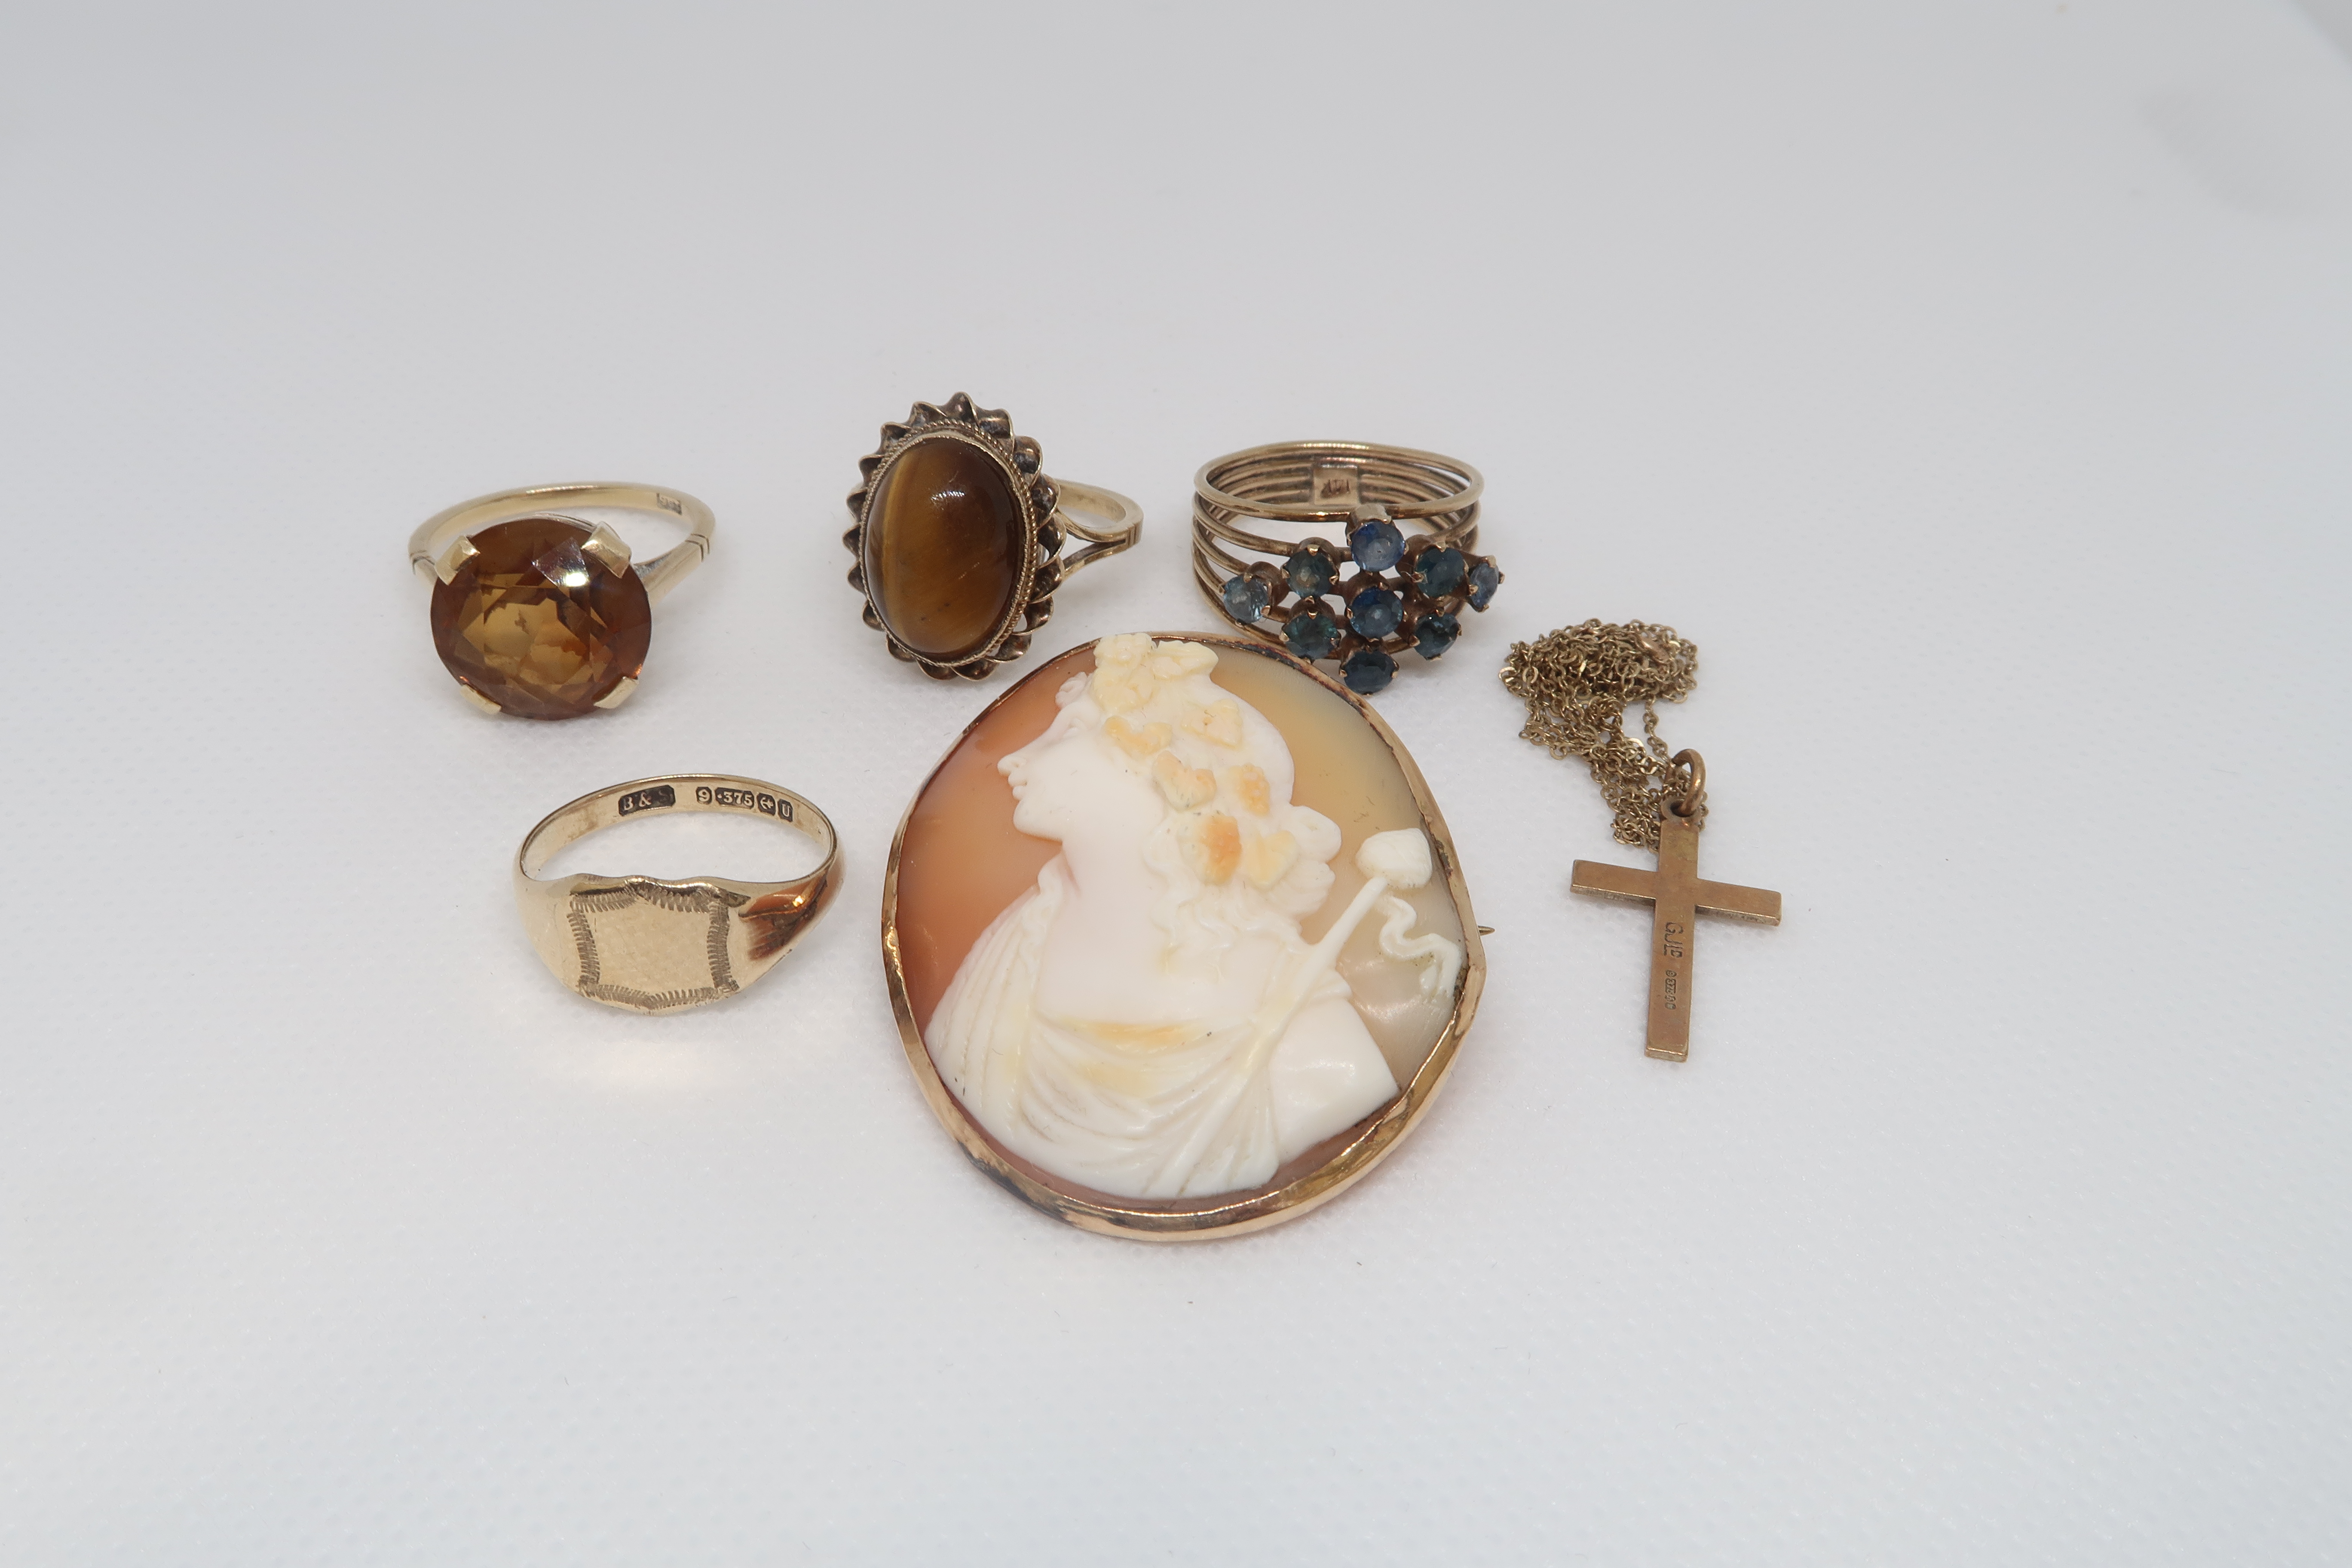 Four gold rings; one 14ct ring and three 9ct rings, all hallmarked, with a 9ct hallmarked cross on a